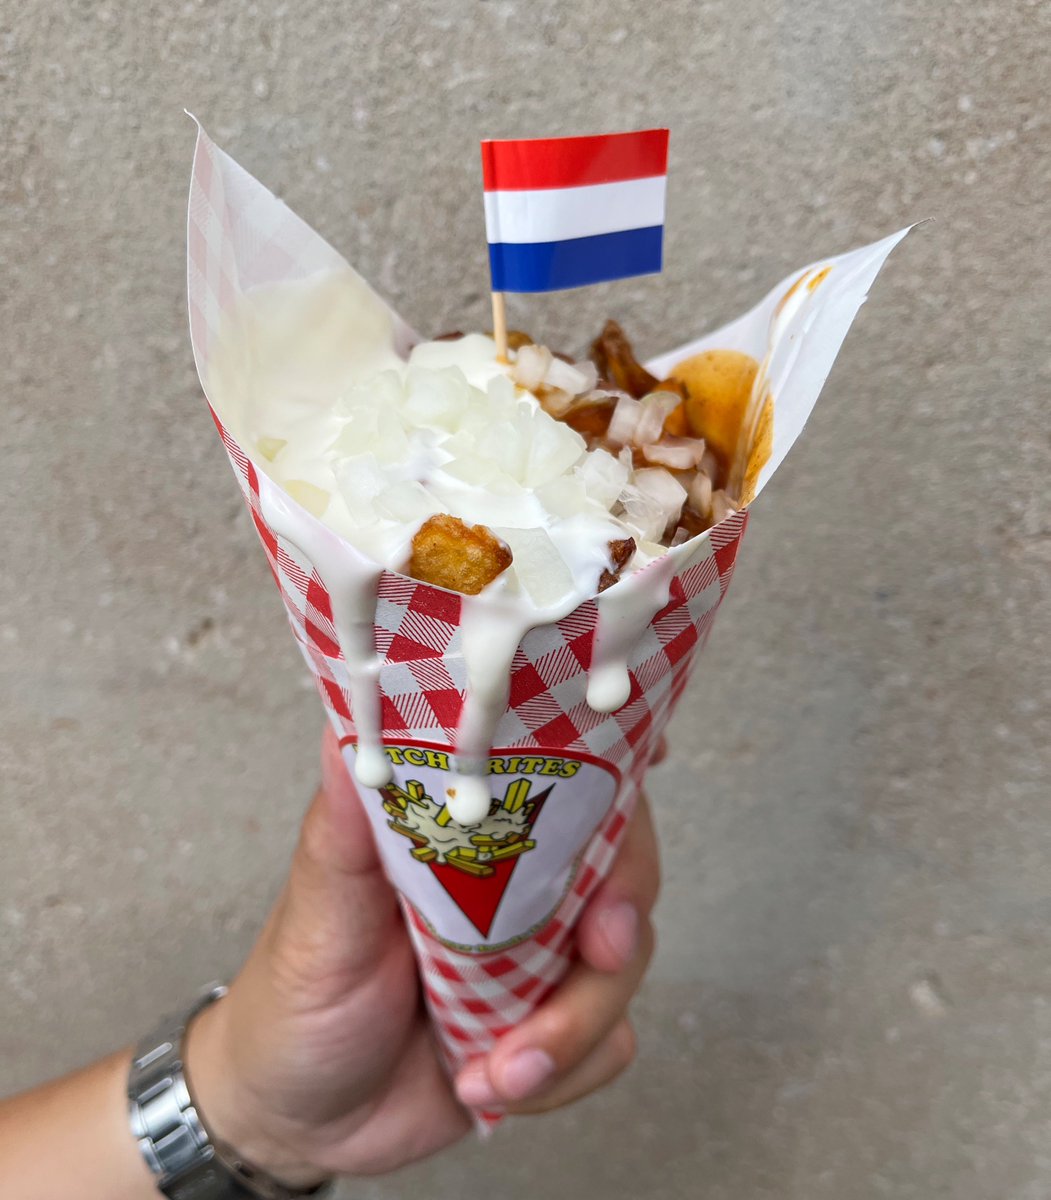 A taste of the Netherlands only at #CNE 🍟🇳🇱 

We love a 𝗙𝗿𝗶𝘁𝗲𝘀 𝗦𝗽𝗲𝗰𝗶𝗮𝗮𝗹! Diced onions, Curry ketchup & special Dutch mayo on fresh hand-cut fries, made to order.

#cnefood #letsgototheex #theEx